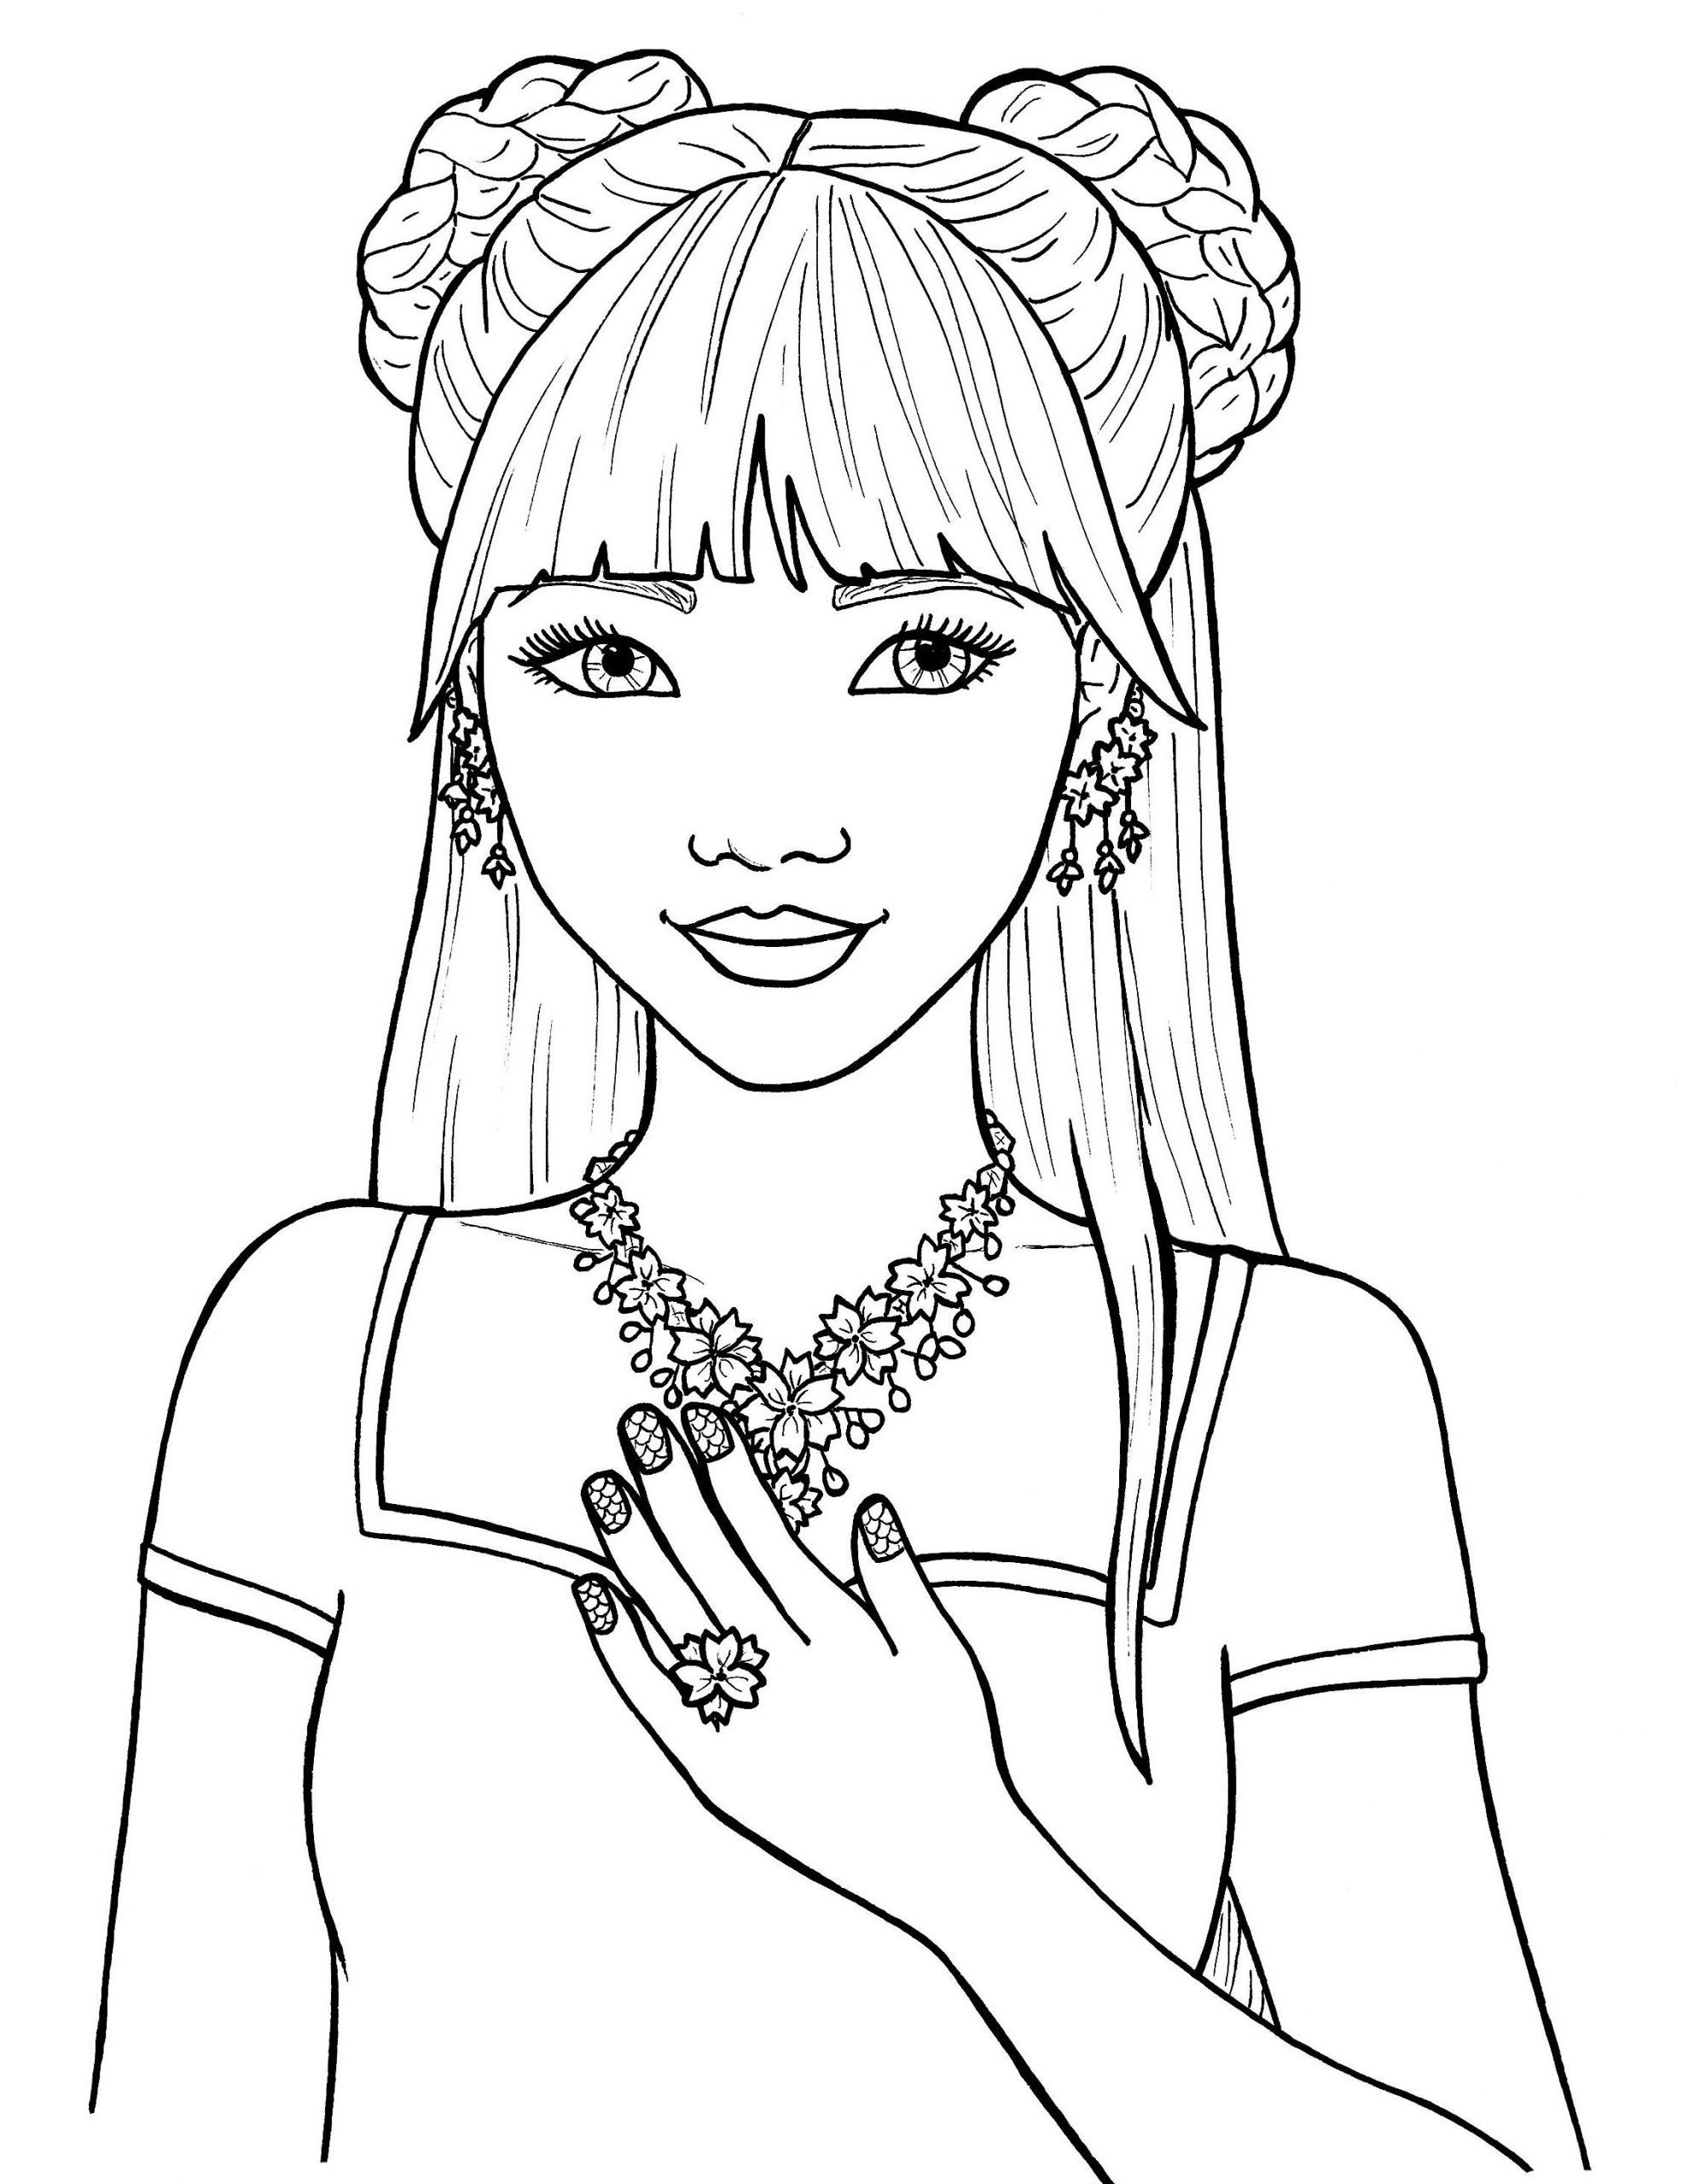 Free Coloring Pages For Girls
 Pretty Girls Coloring Pages Free